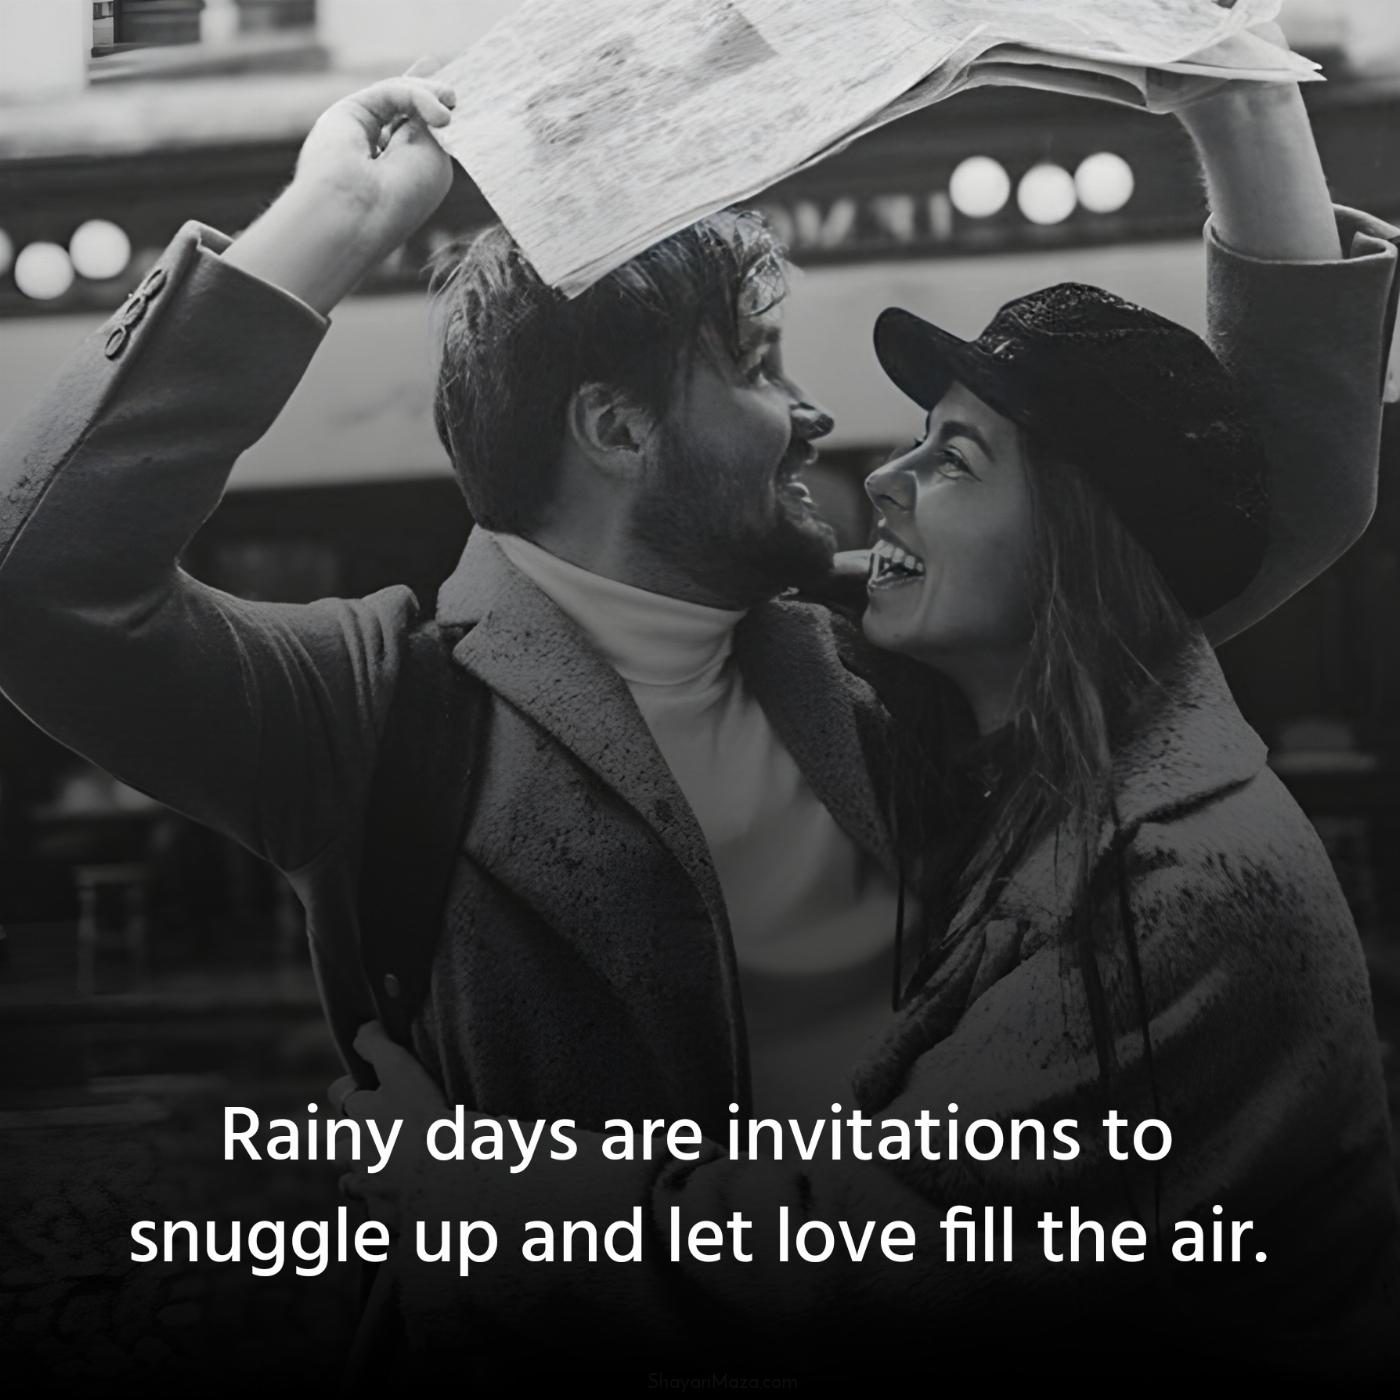 Rainy days are invitations to snuggle up and let love fill the air